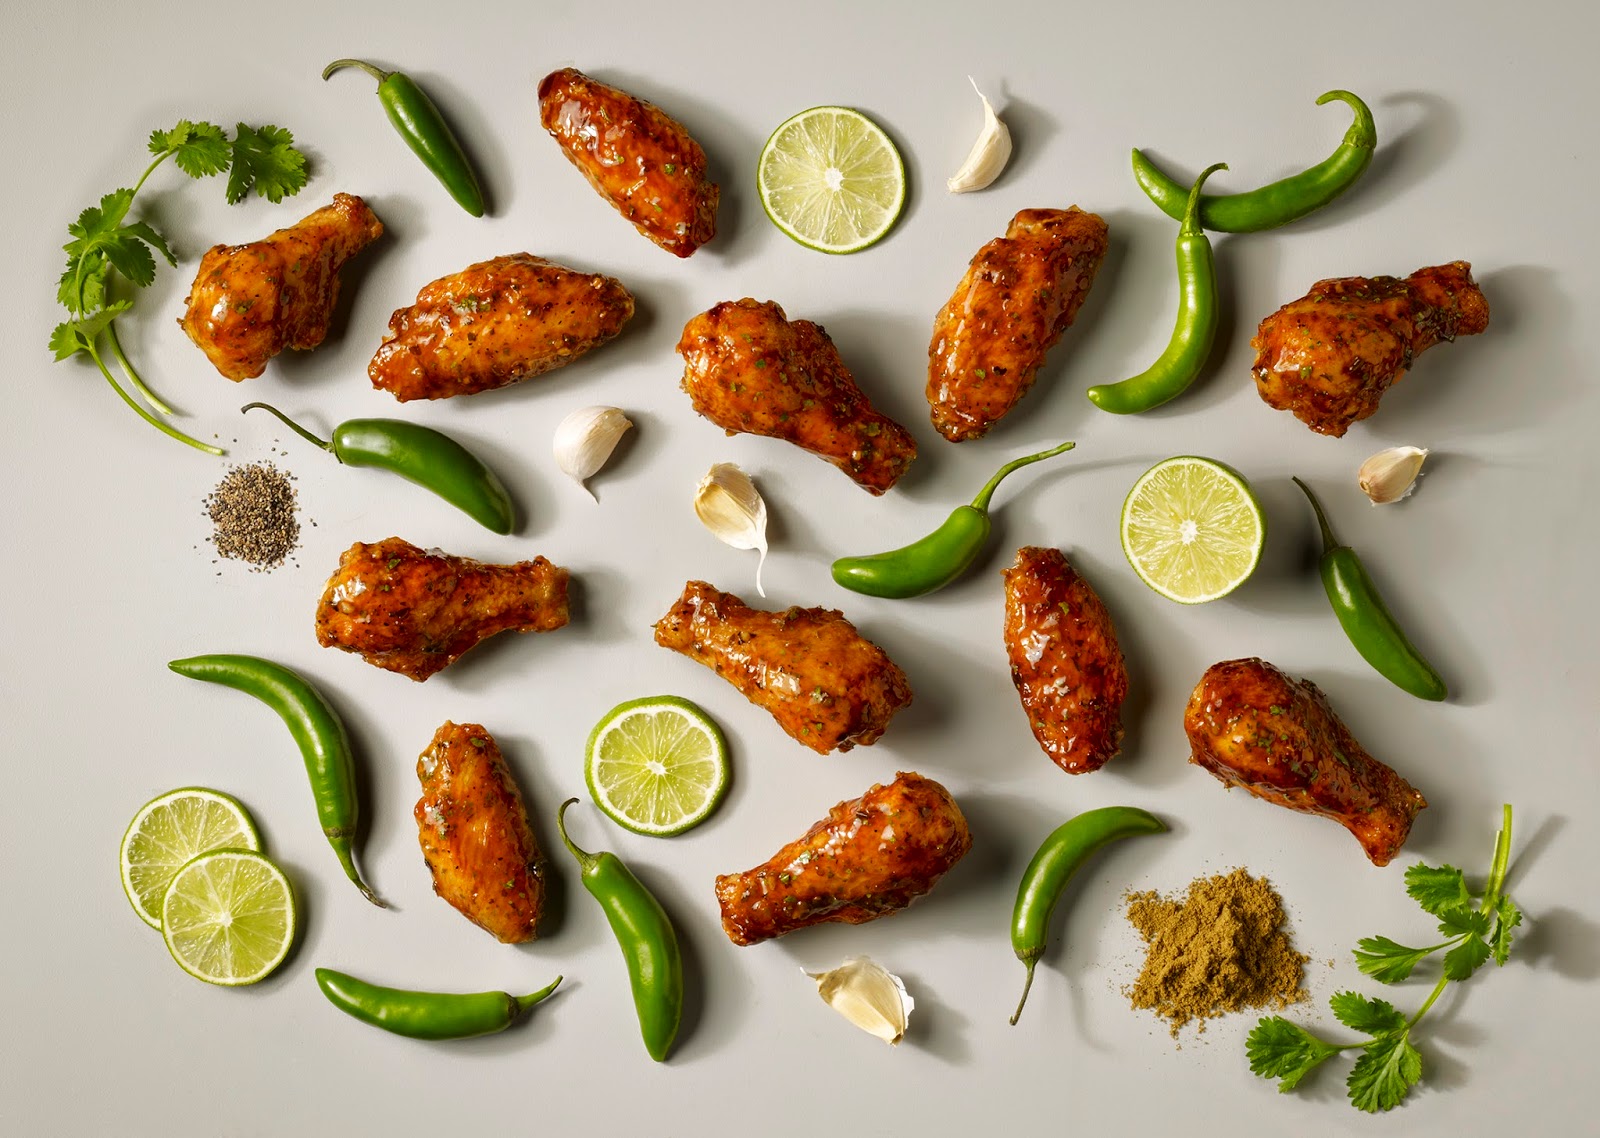 SerranoGlazeTabletopFullFocusV2 Giveaway- Enter For a Chance to Win a $25 Wingstop Gift Card - Try Serrano Pepper Glaze